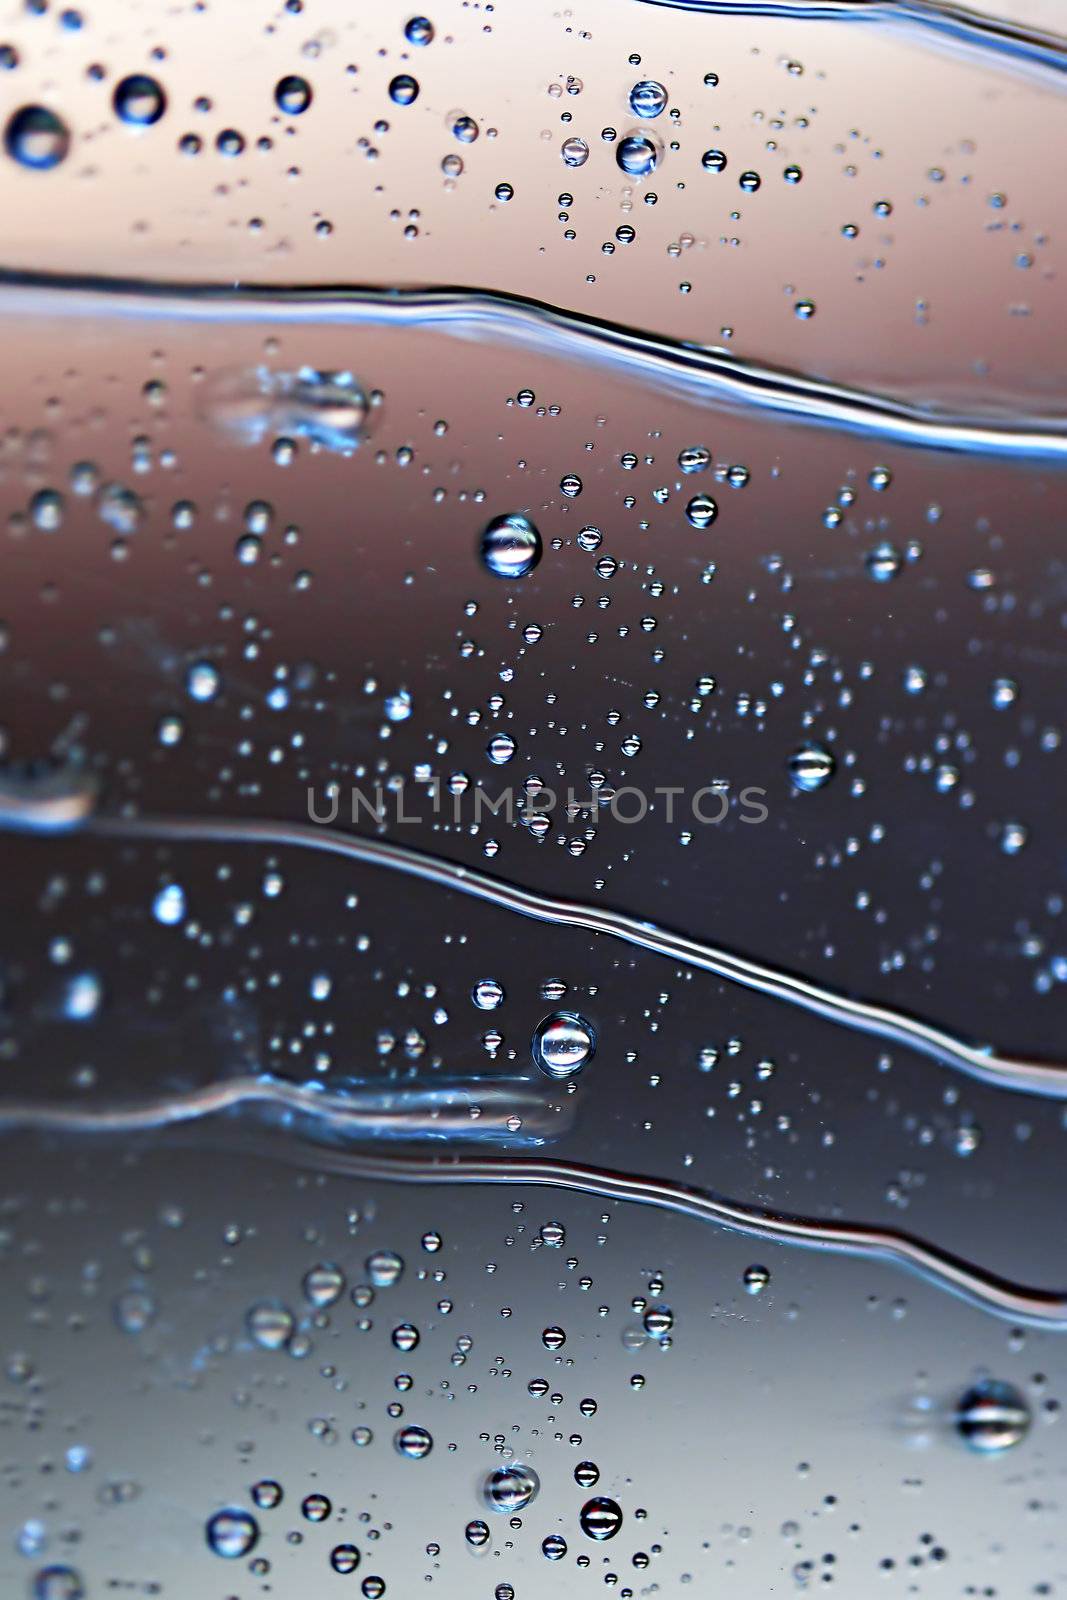 Waterdroplets and colours by kjorgen